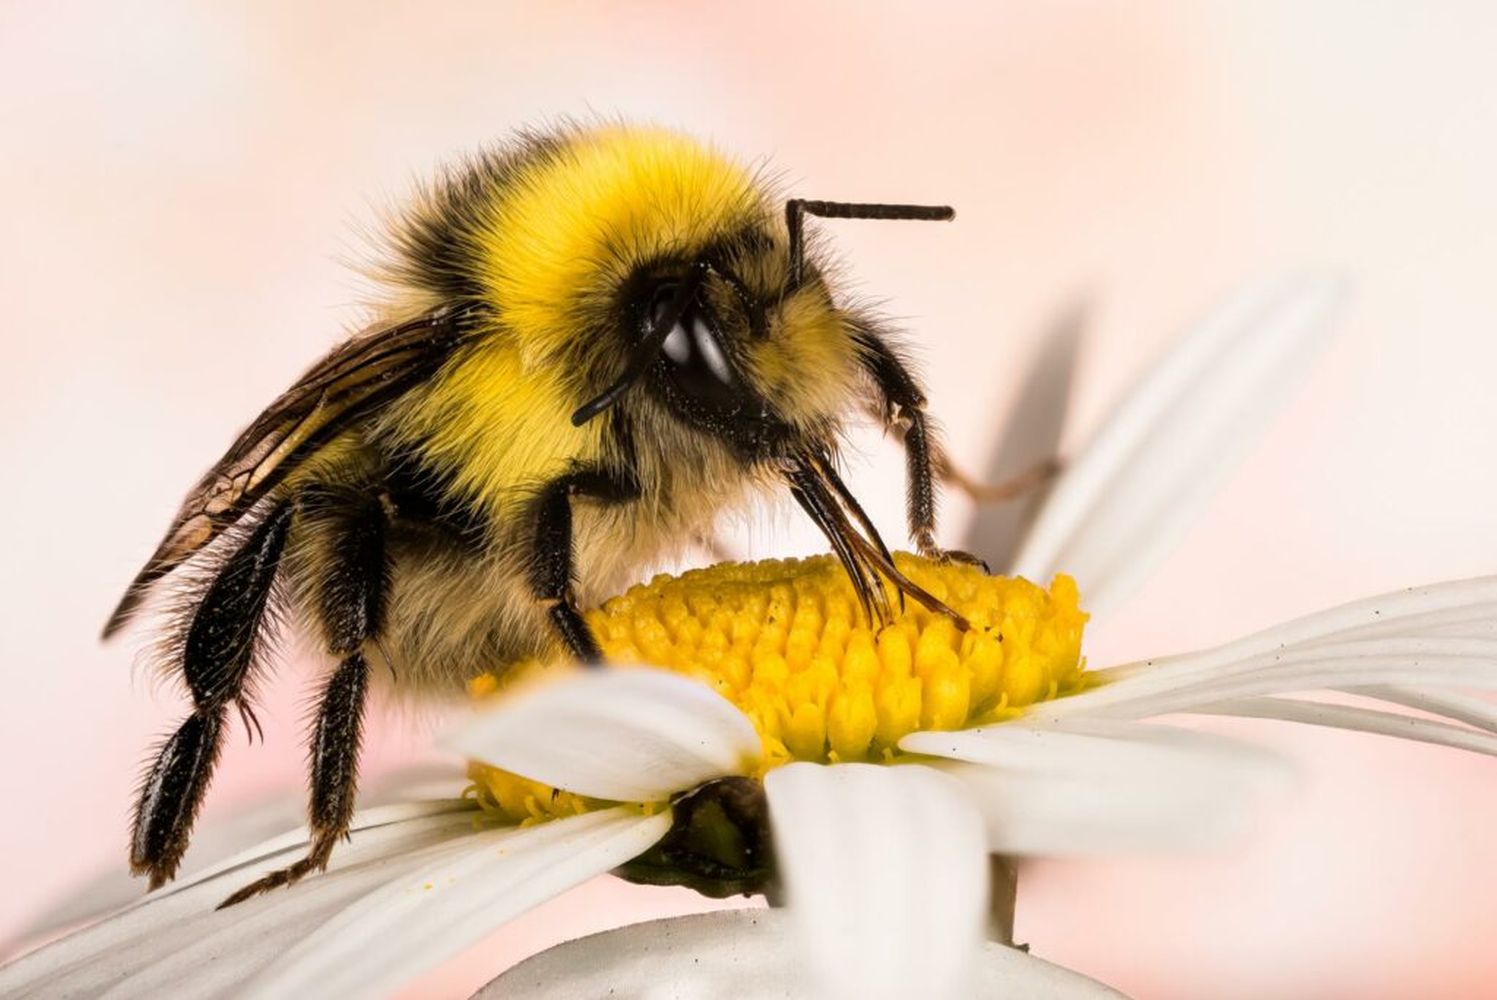 andrew lebowitz share bumble bee pic photos